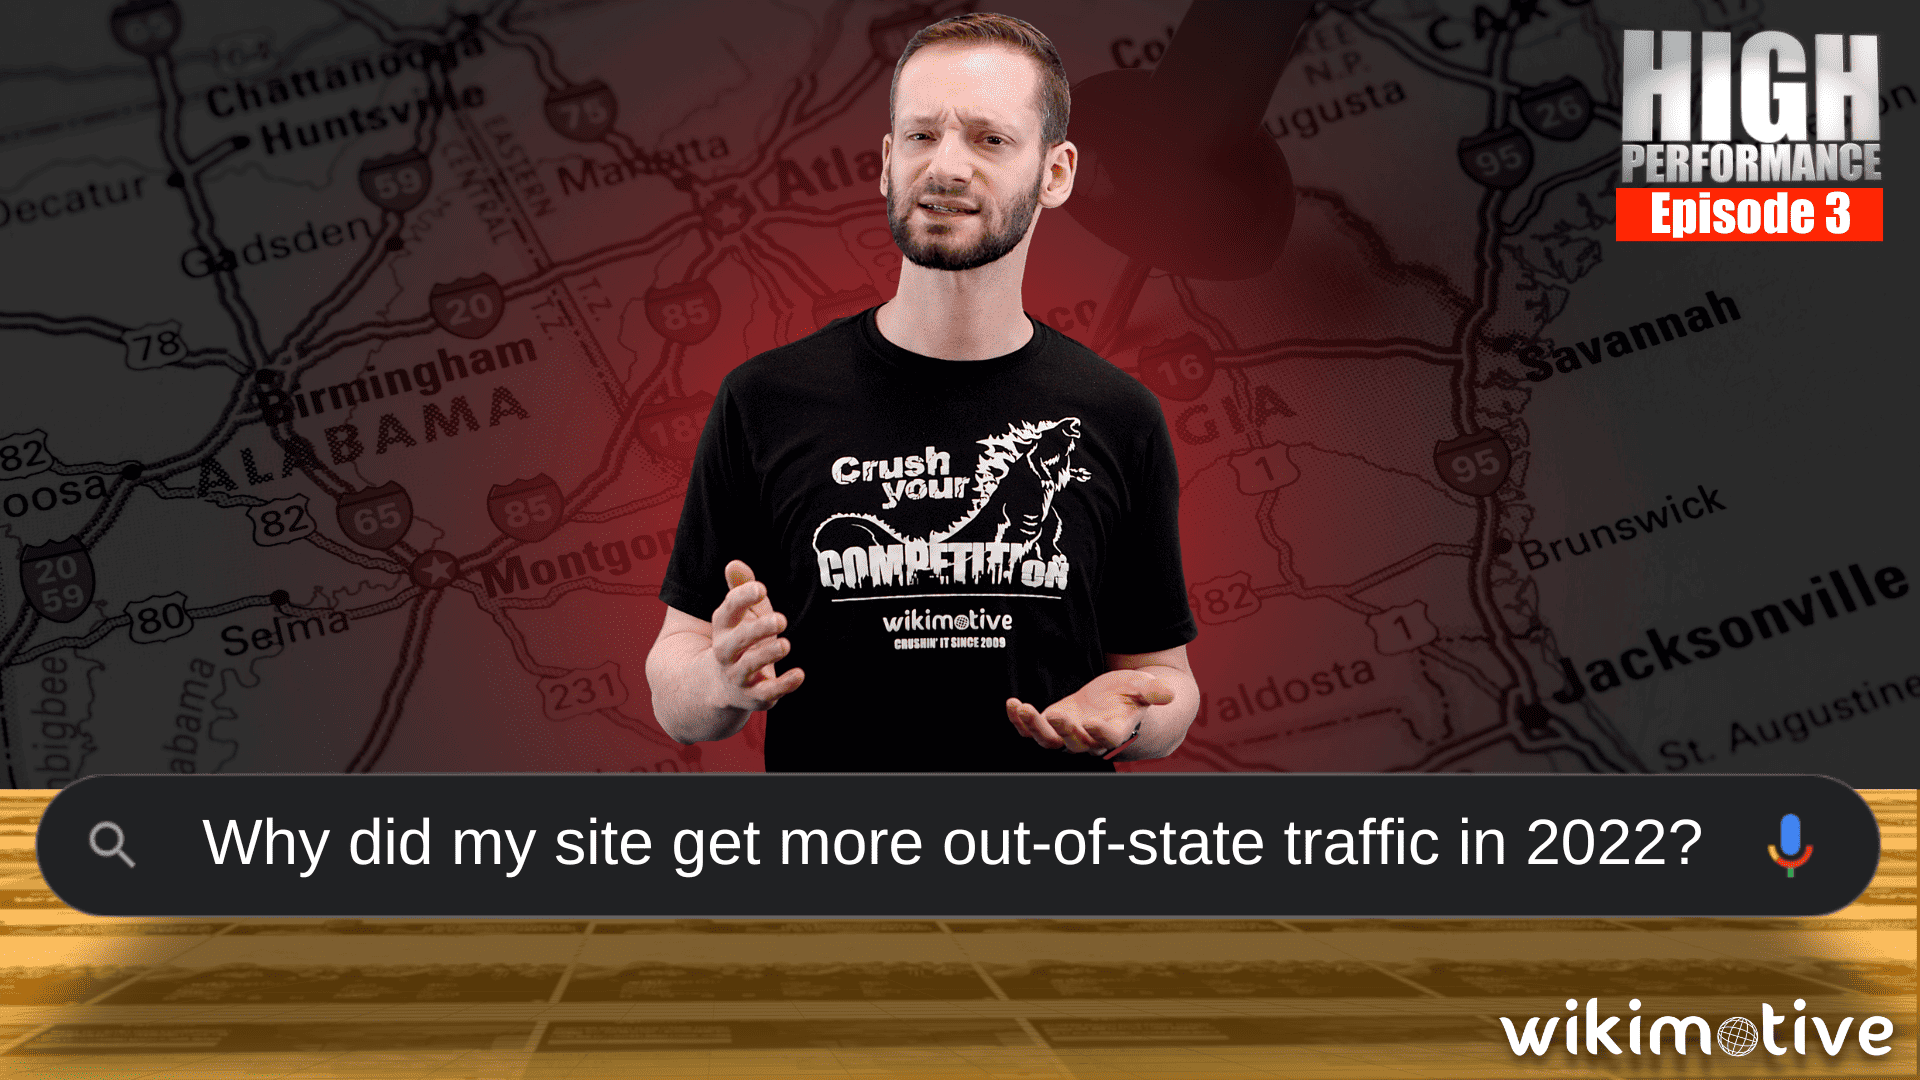 Why did my site get more out-of-state traffic in 2022?